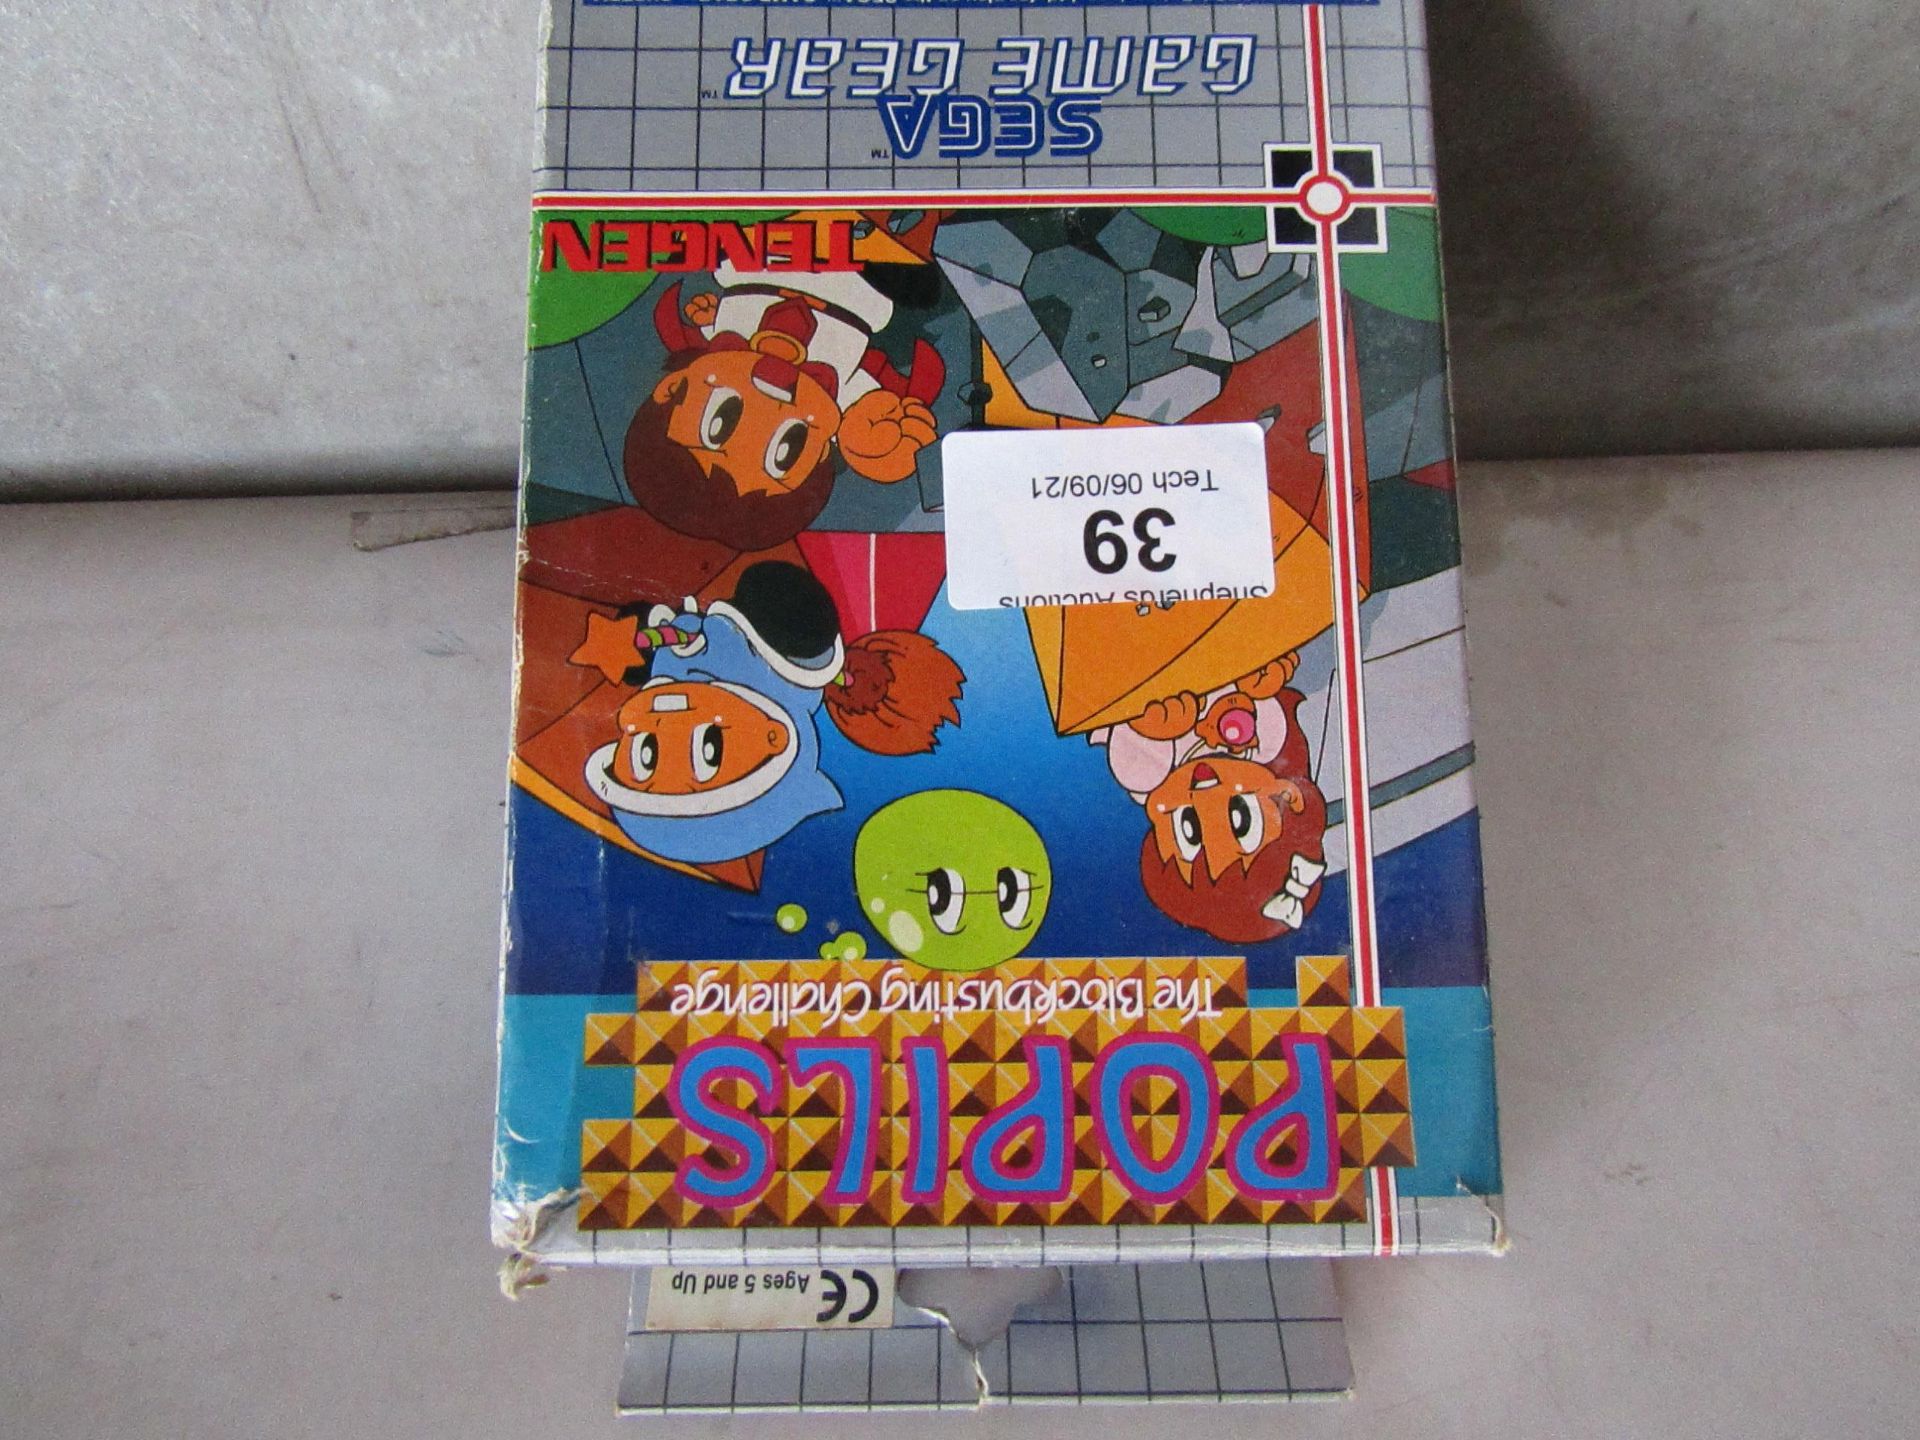 Sega Game Gear Poplis game, unchecked in original box, simialr items appear to be selling on ebay